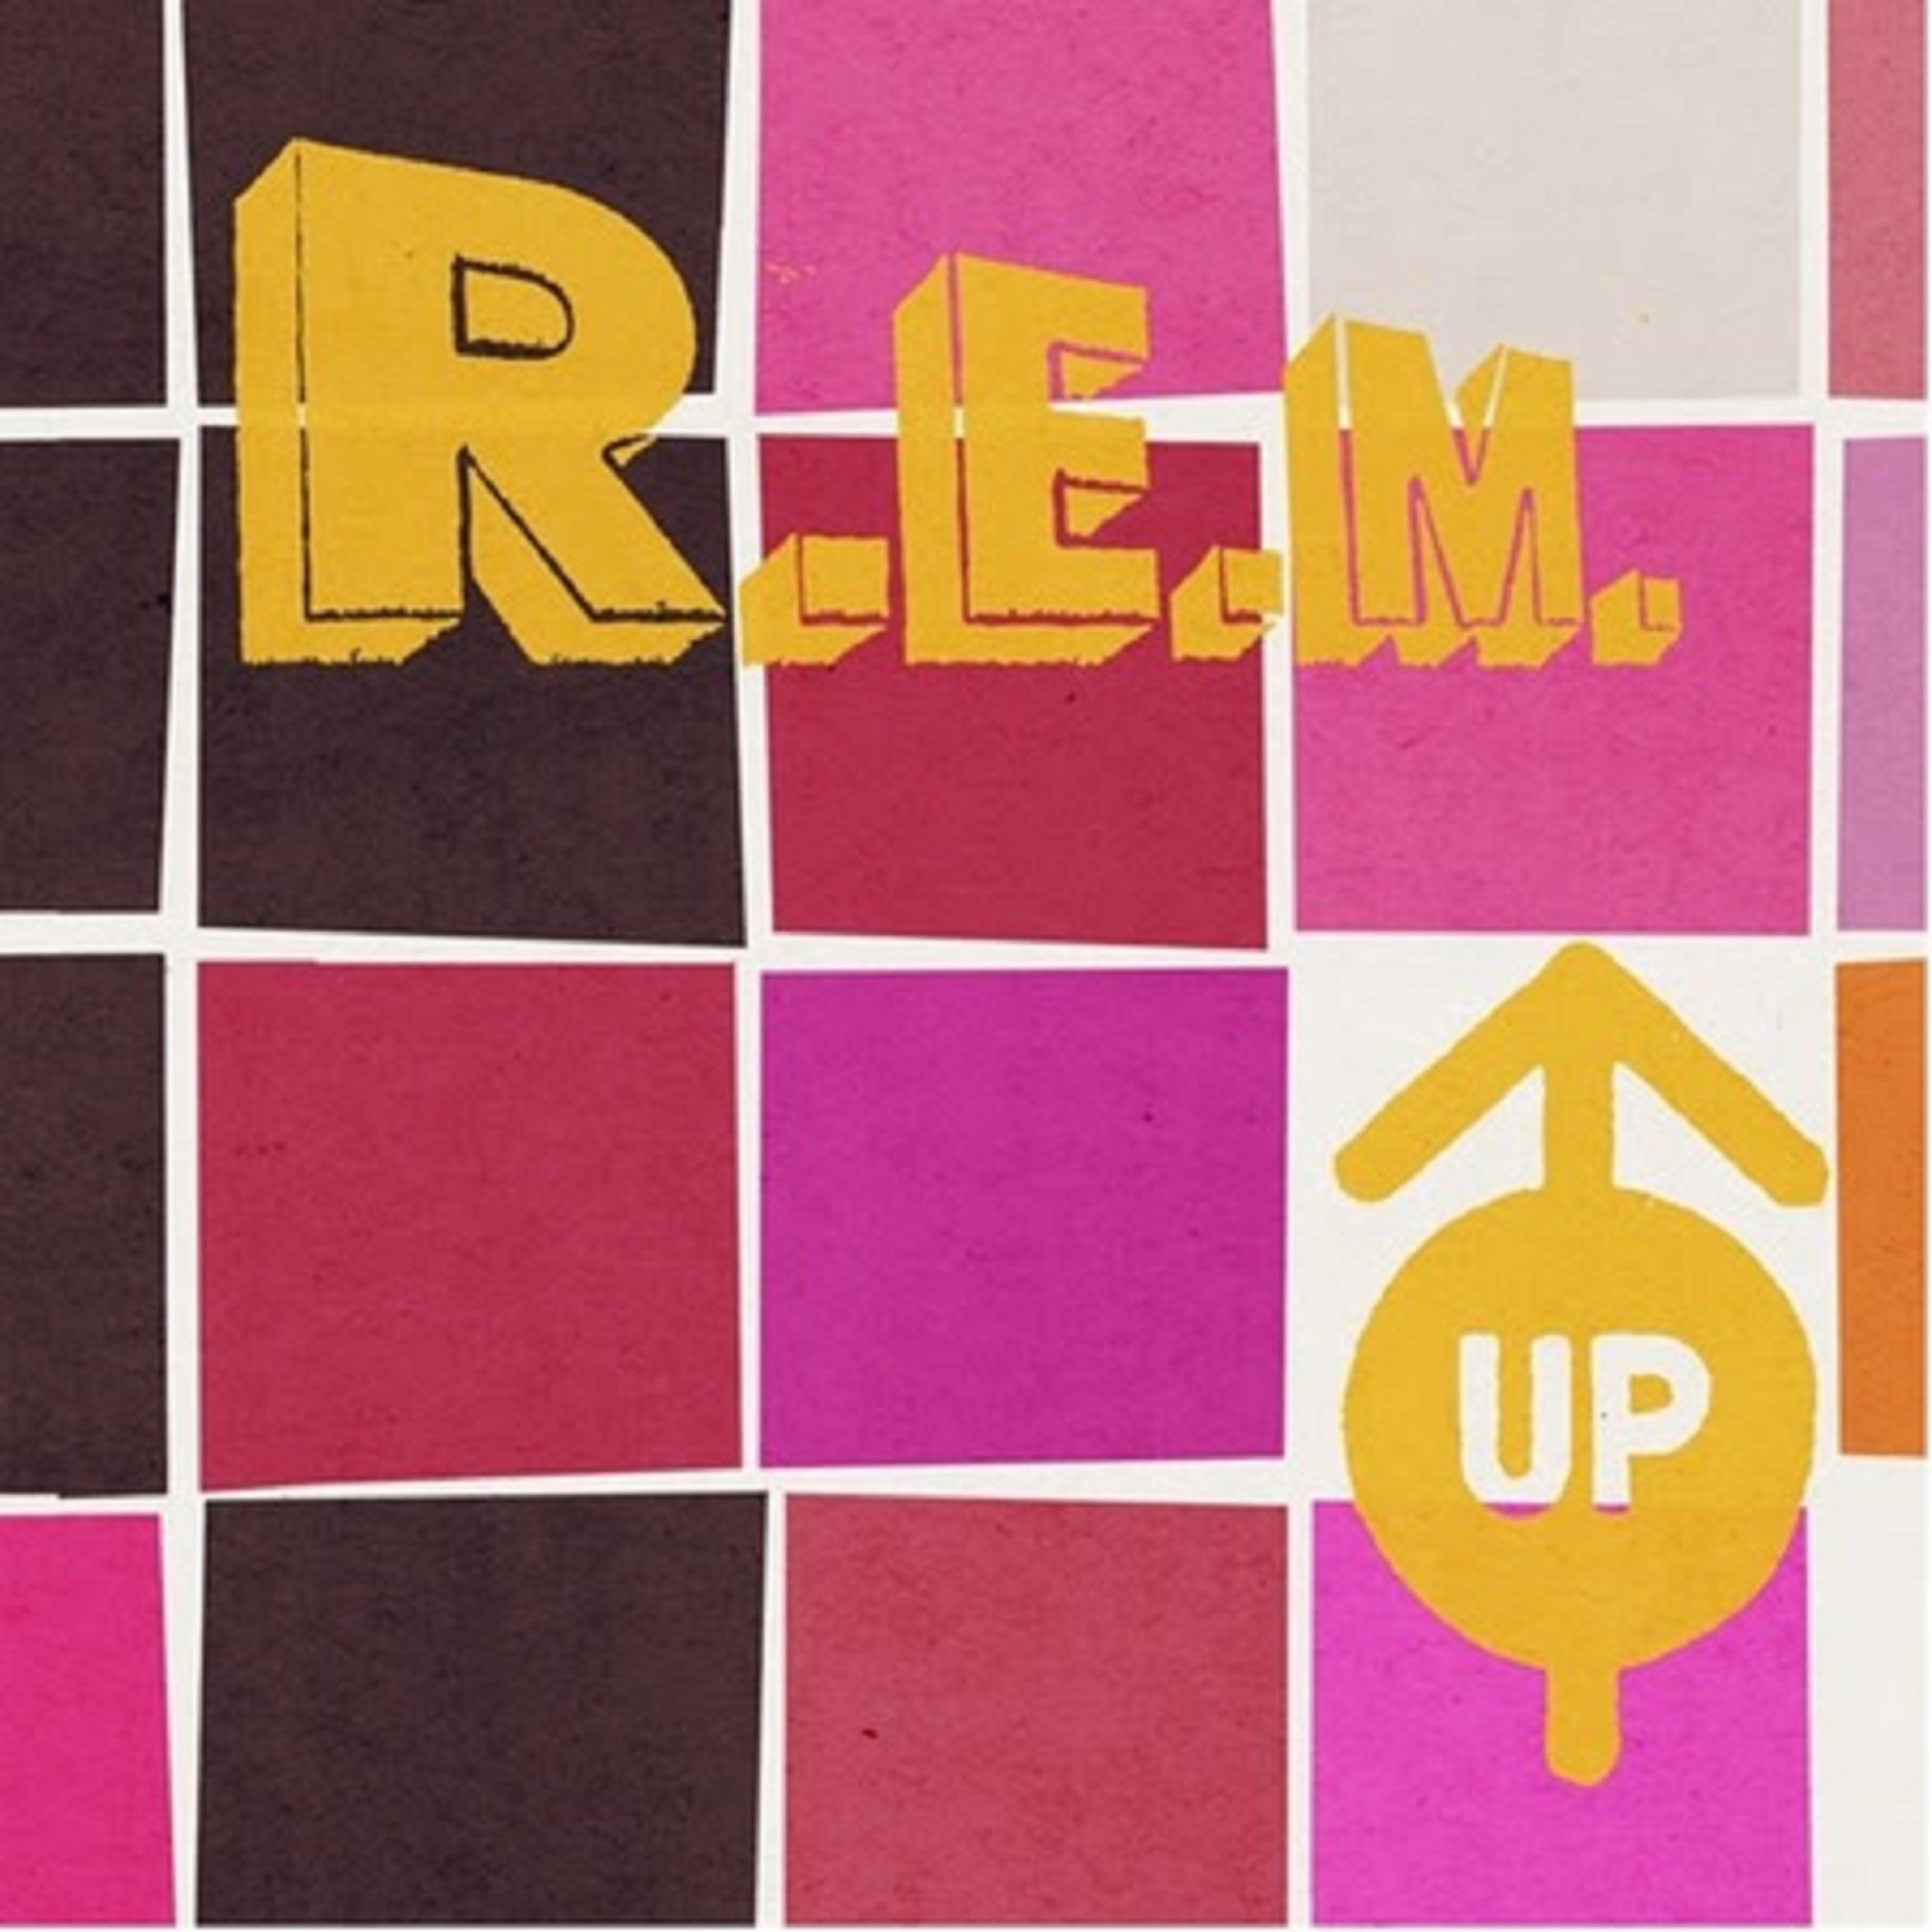 25TH ANNIVERSARY EDITION OF R.E.M.’S UP OUT NOW